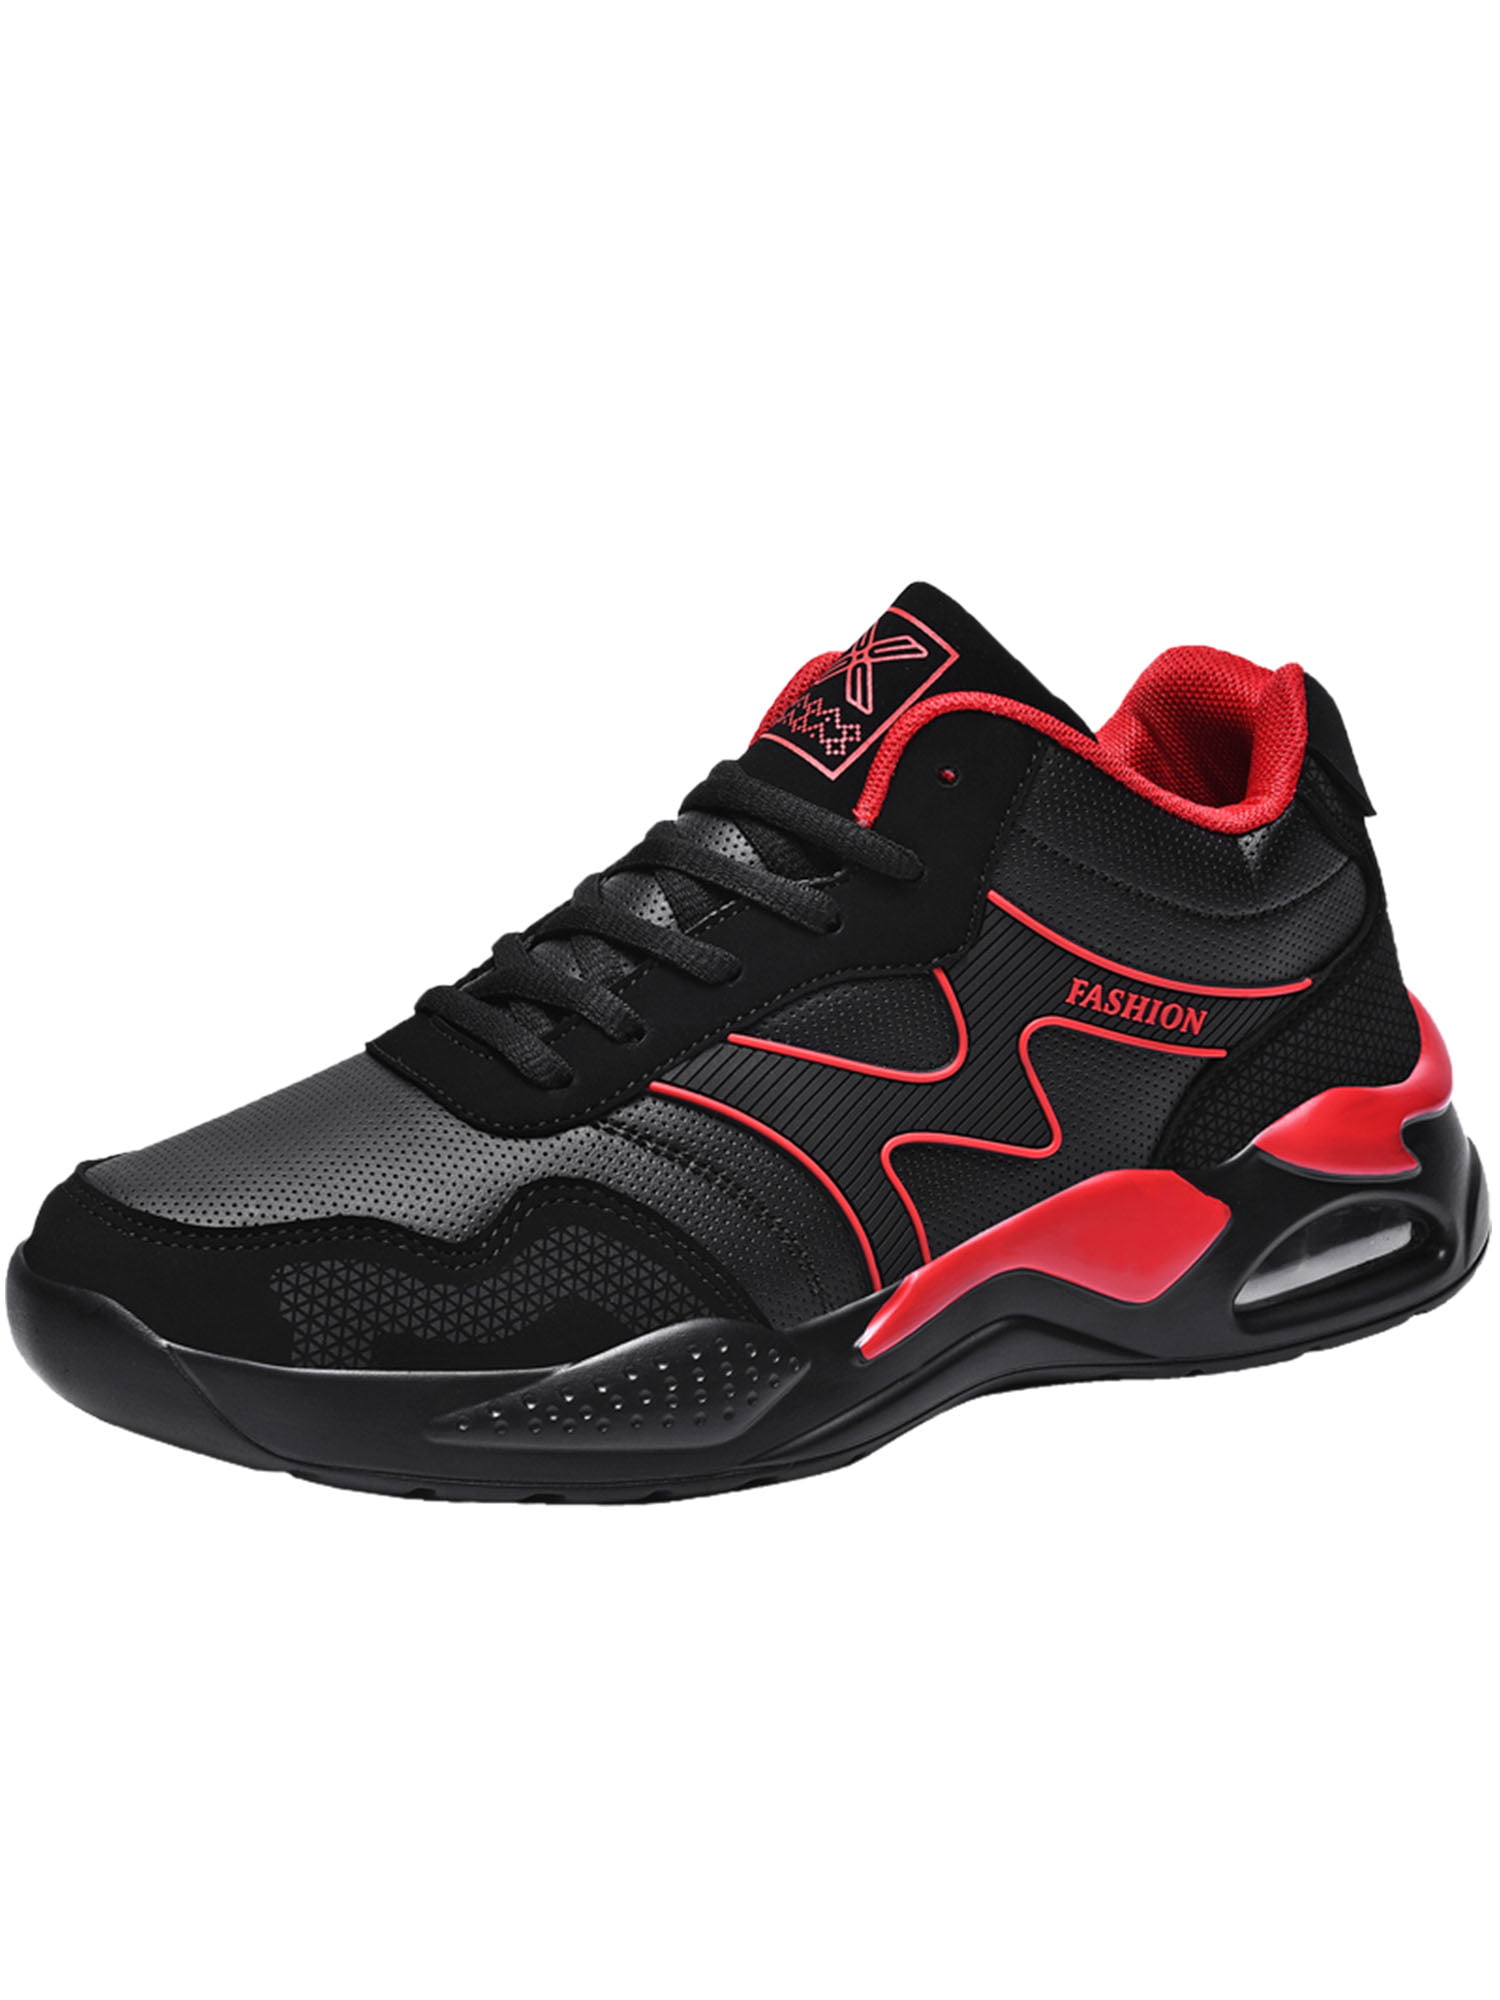 Men's Classic Athletic Sports Shoes Tennis/Running/Gym Casual Shoes Sneakers